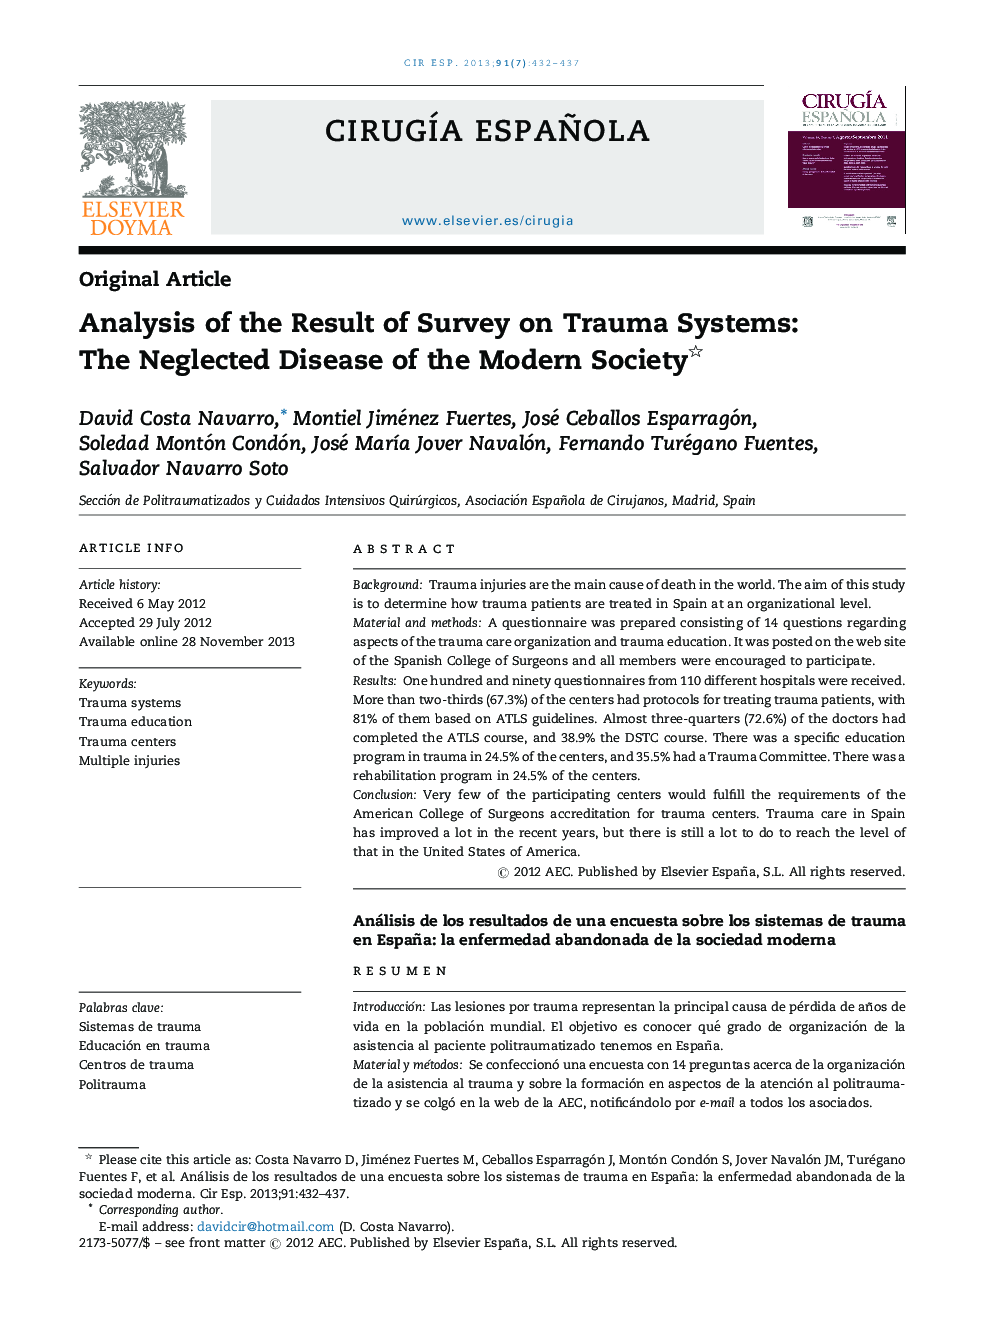 Analysis of the Result of Survey on Trauma Systems: The Neglected Disease of the Modern Society 